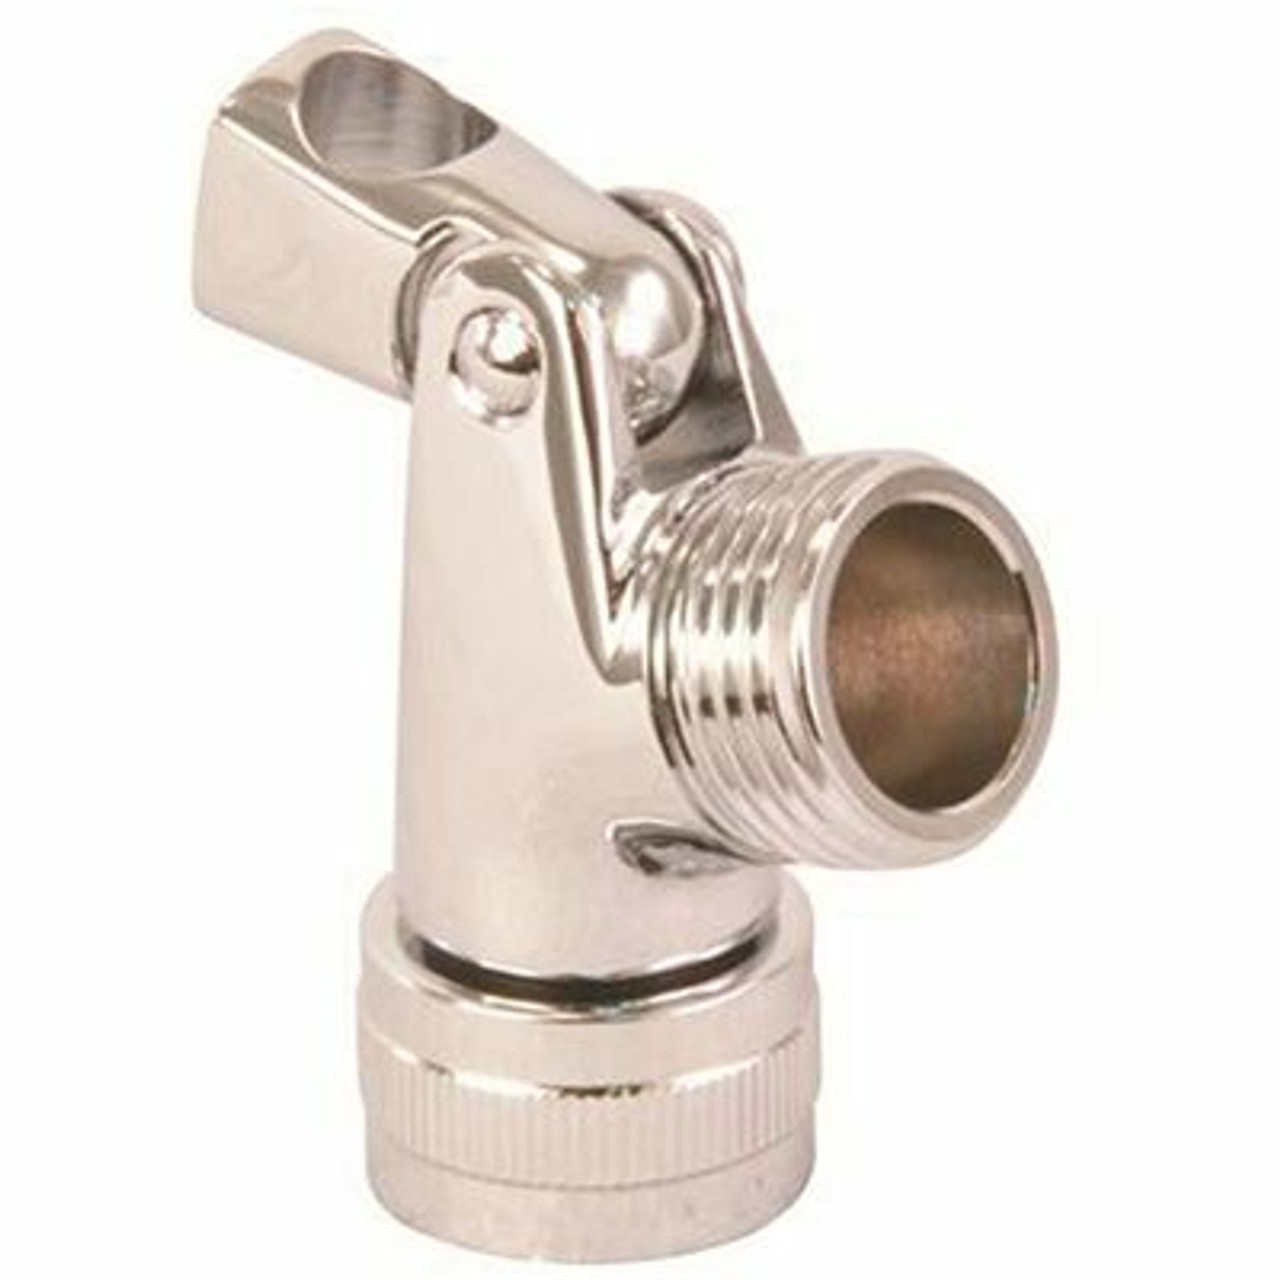 Proplus Hand Held Shower Head Swivel Connector In Chrome